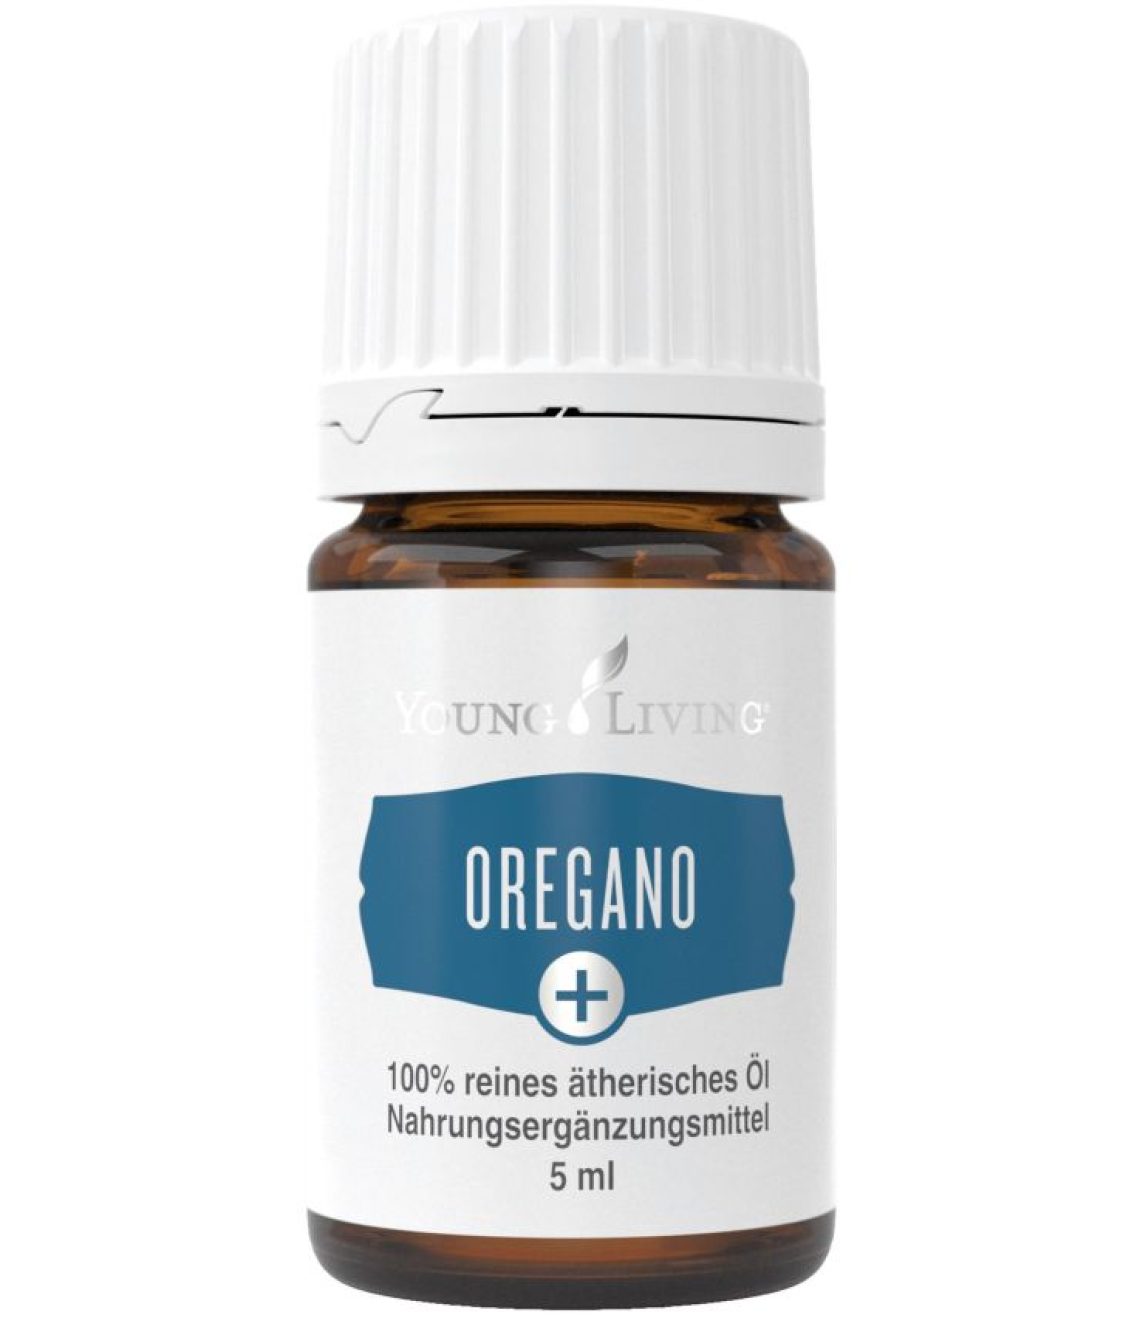 2110000113421_1824_1_young_living_oregano__5ml_reines_aetherisches_oel_6221538d